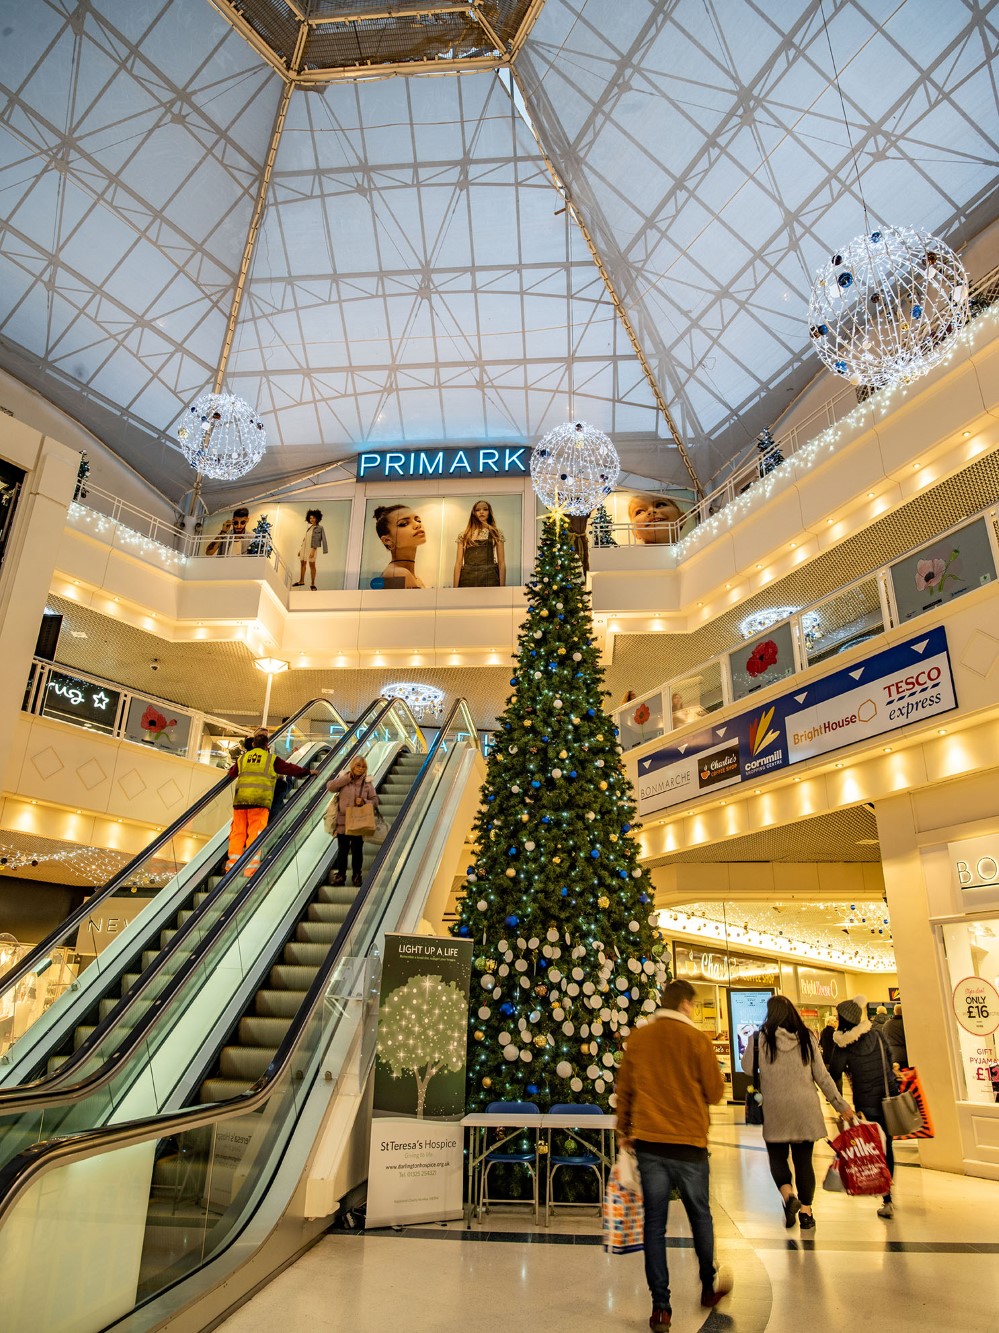 Large-scale artificial green Christmas Tree with blue, gold and white baubles on it, standing in the middle of the shopping centre with bright white icicle lights and bright white aurora balls hanging from the ceiling.